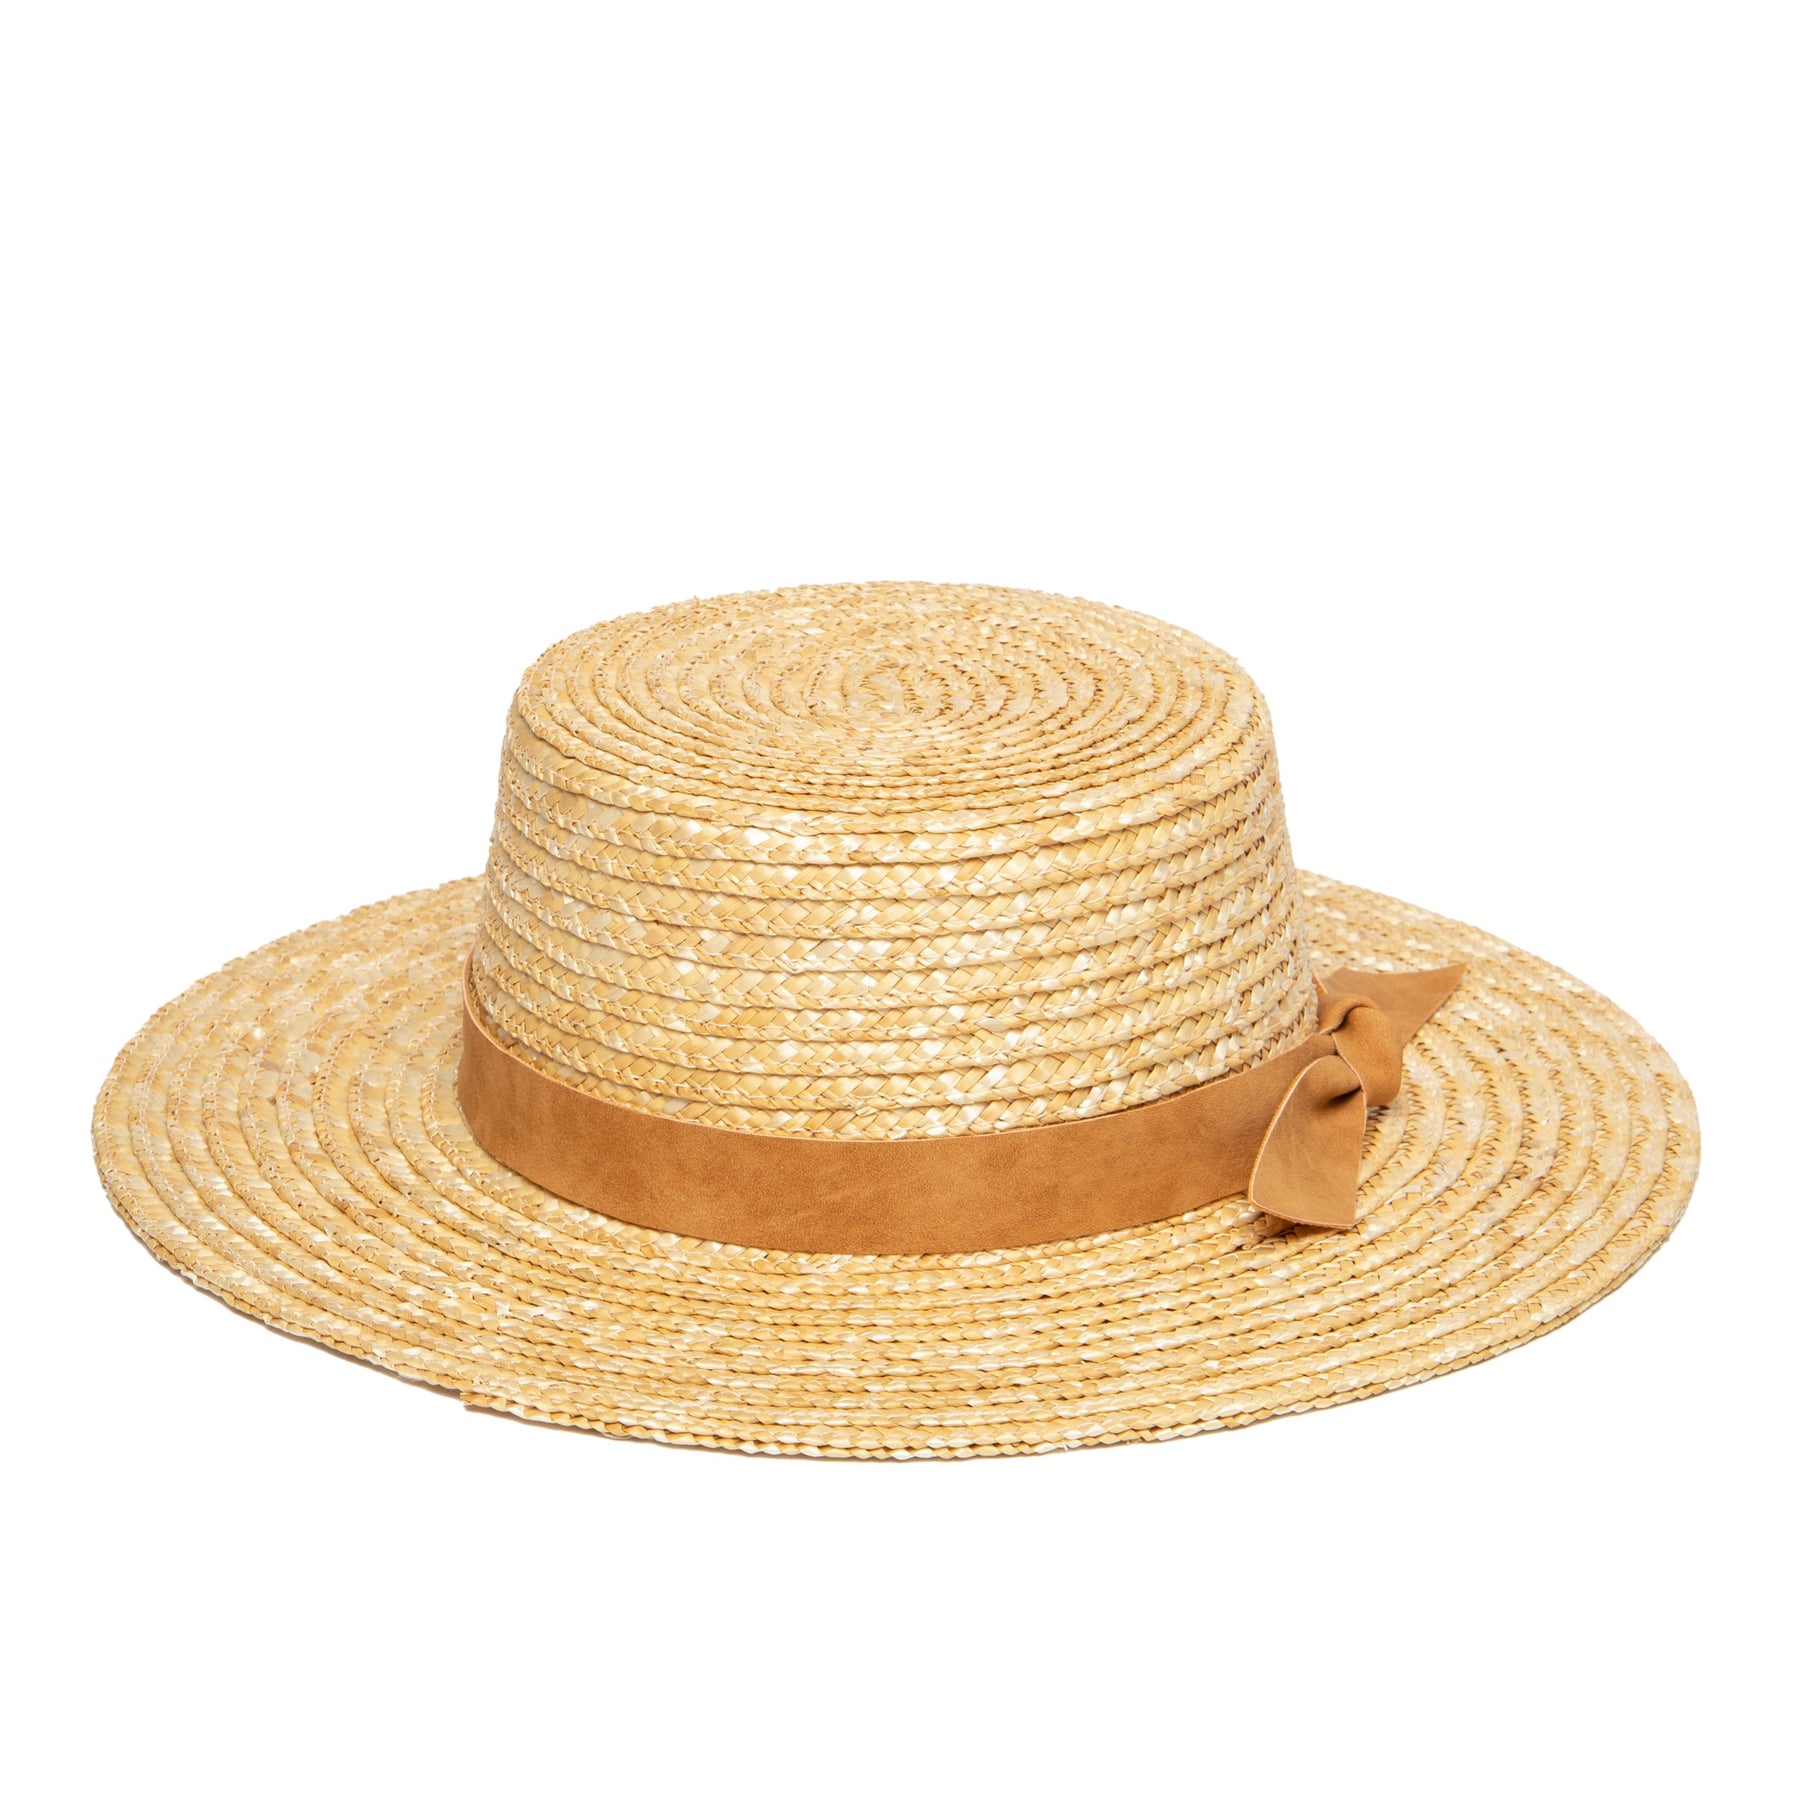 Women's wheat straw boater with faux leather band – San Diego Hat Company